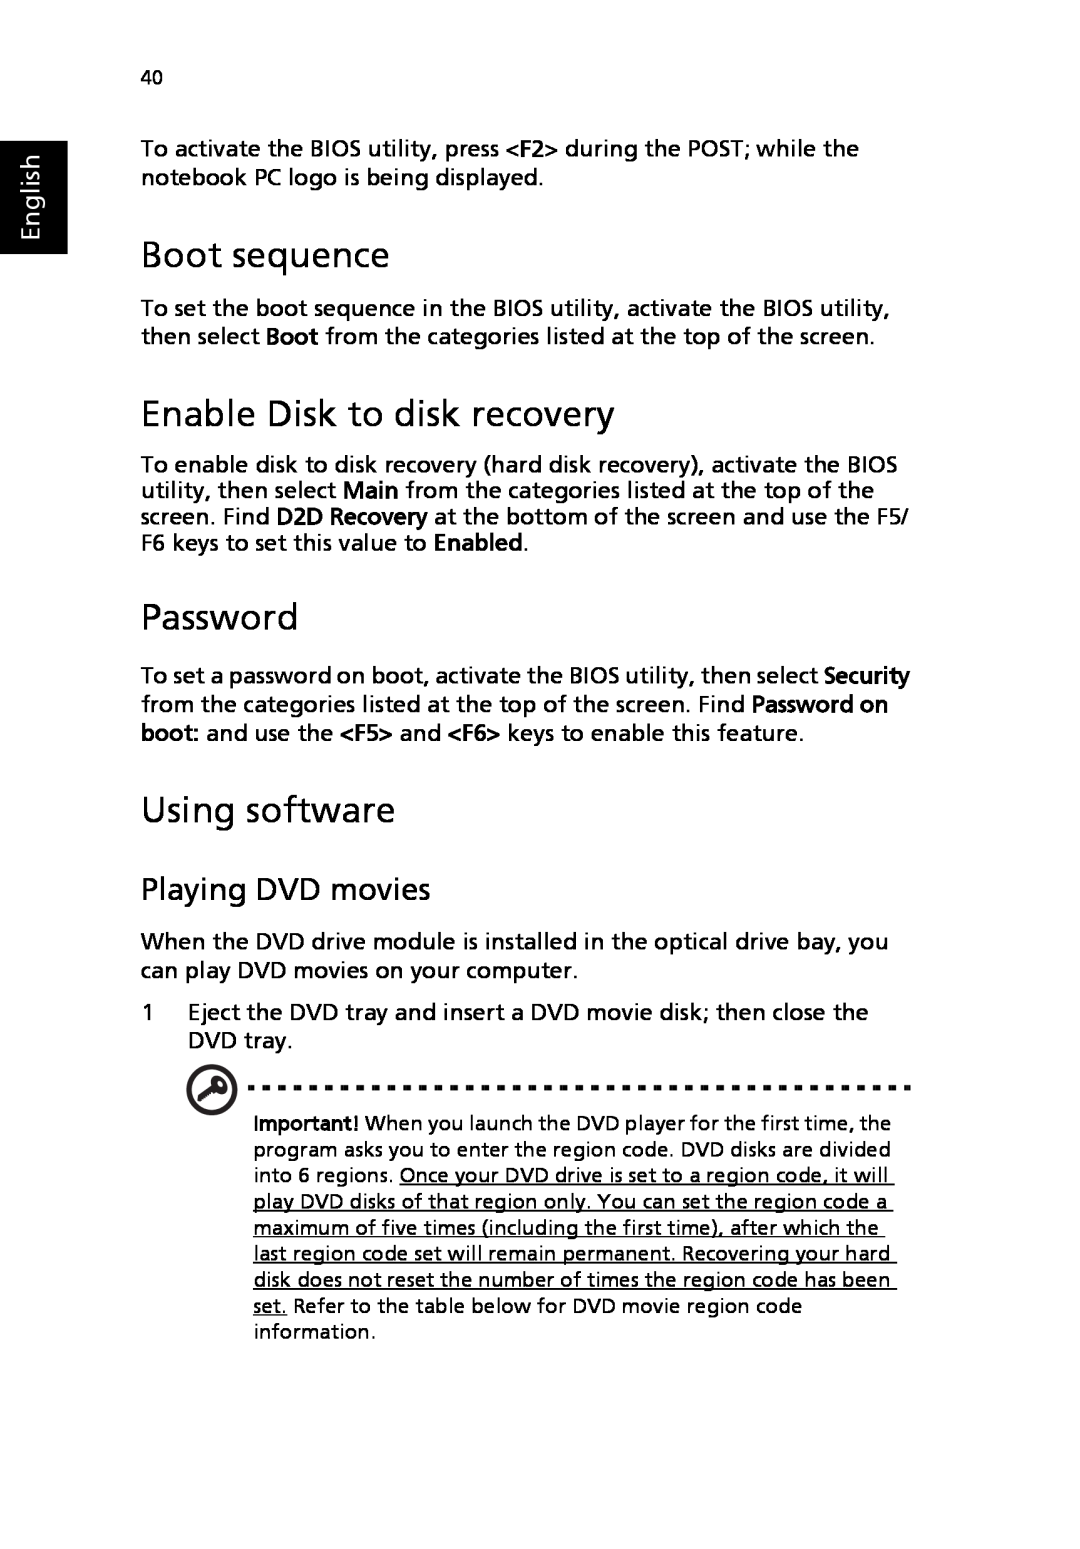 Acer 2310 Series manual Boot sequence, Enable Disk to disk recovery, Password, Using software, Playing DVD movies, English 